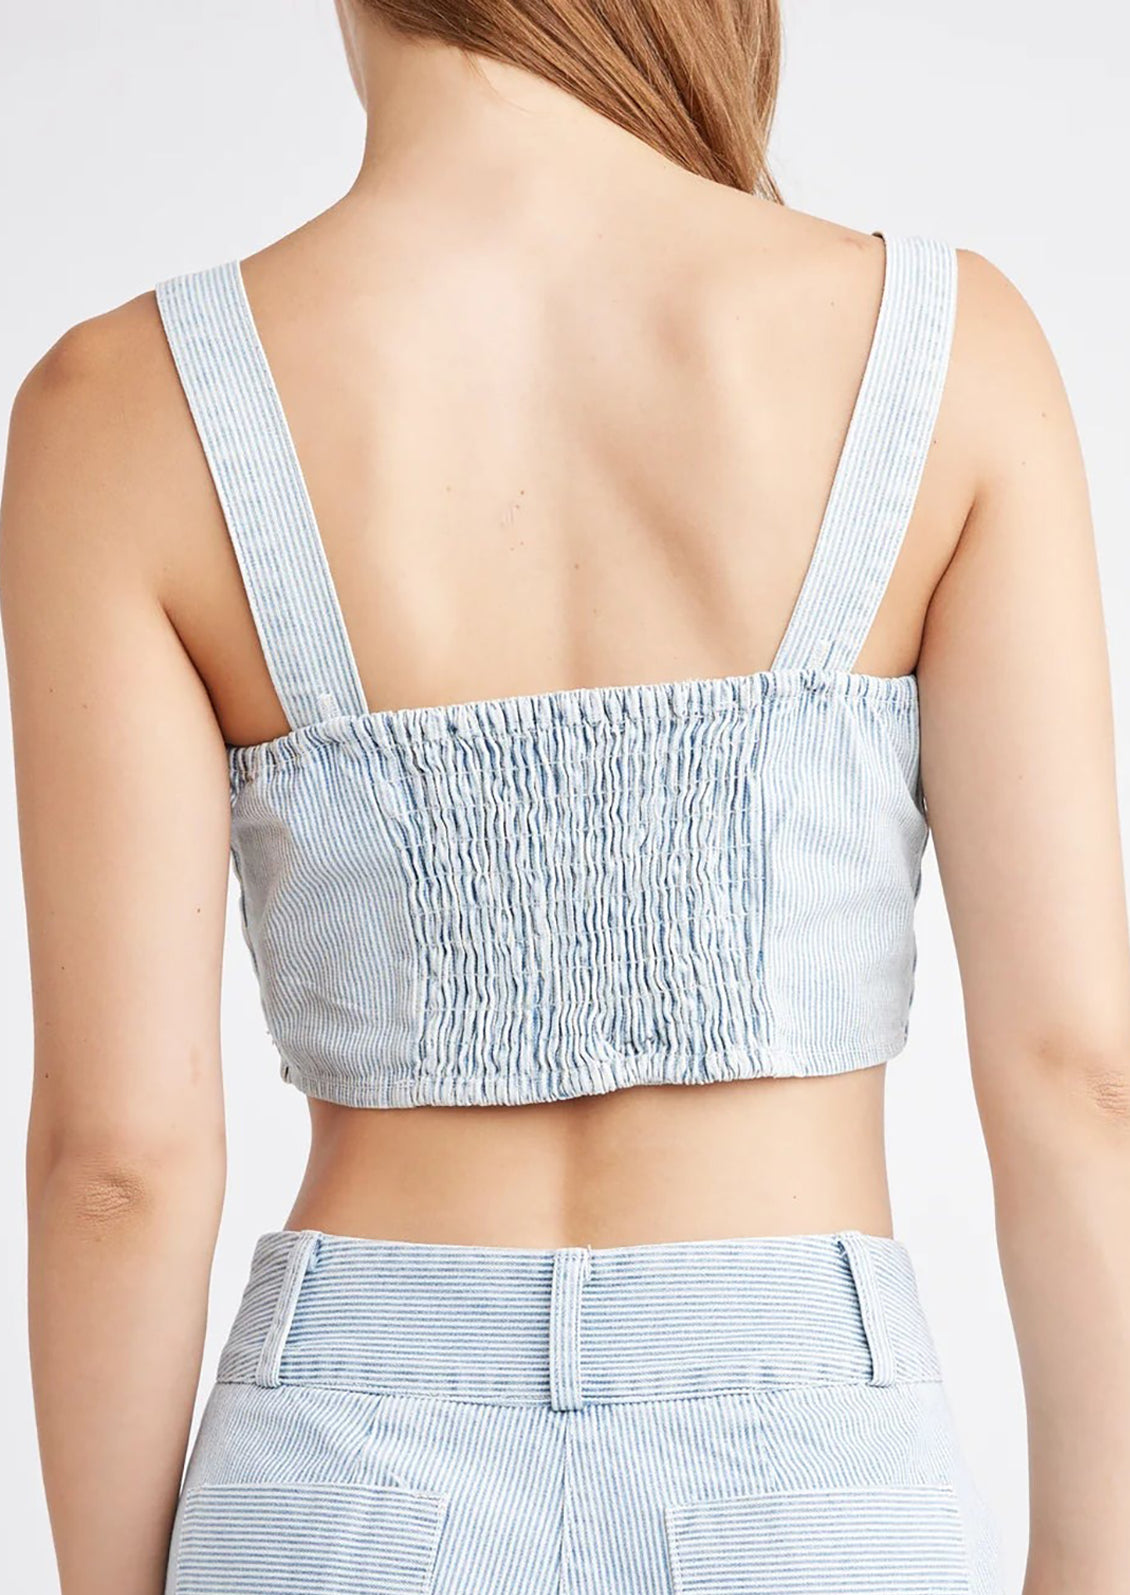 A woman wearing a square neck crop top with smocked elastic back.